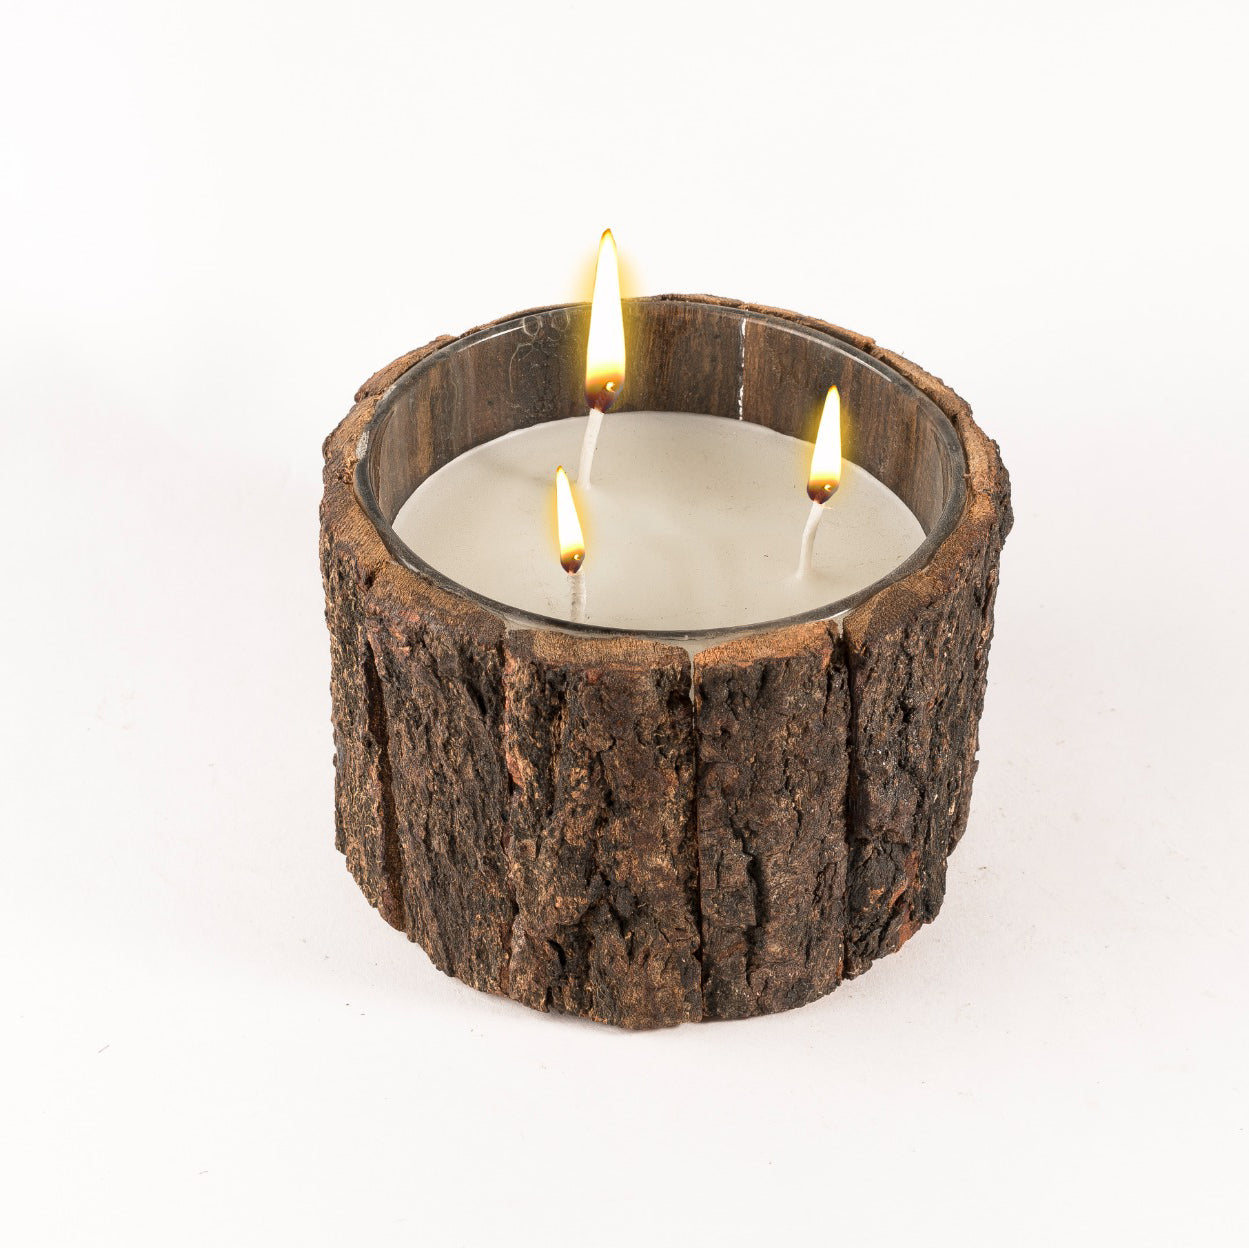 Wood Bark Glass Candle with Three Wick